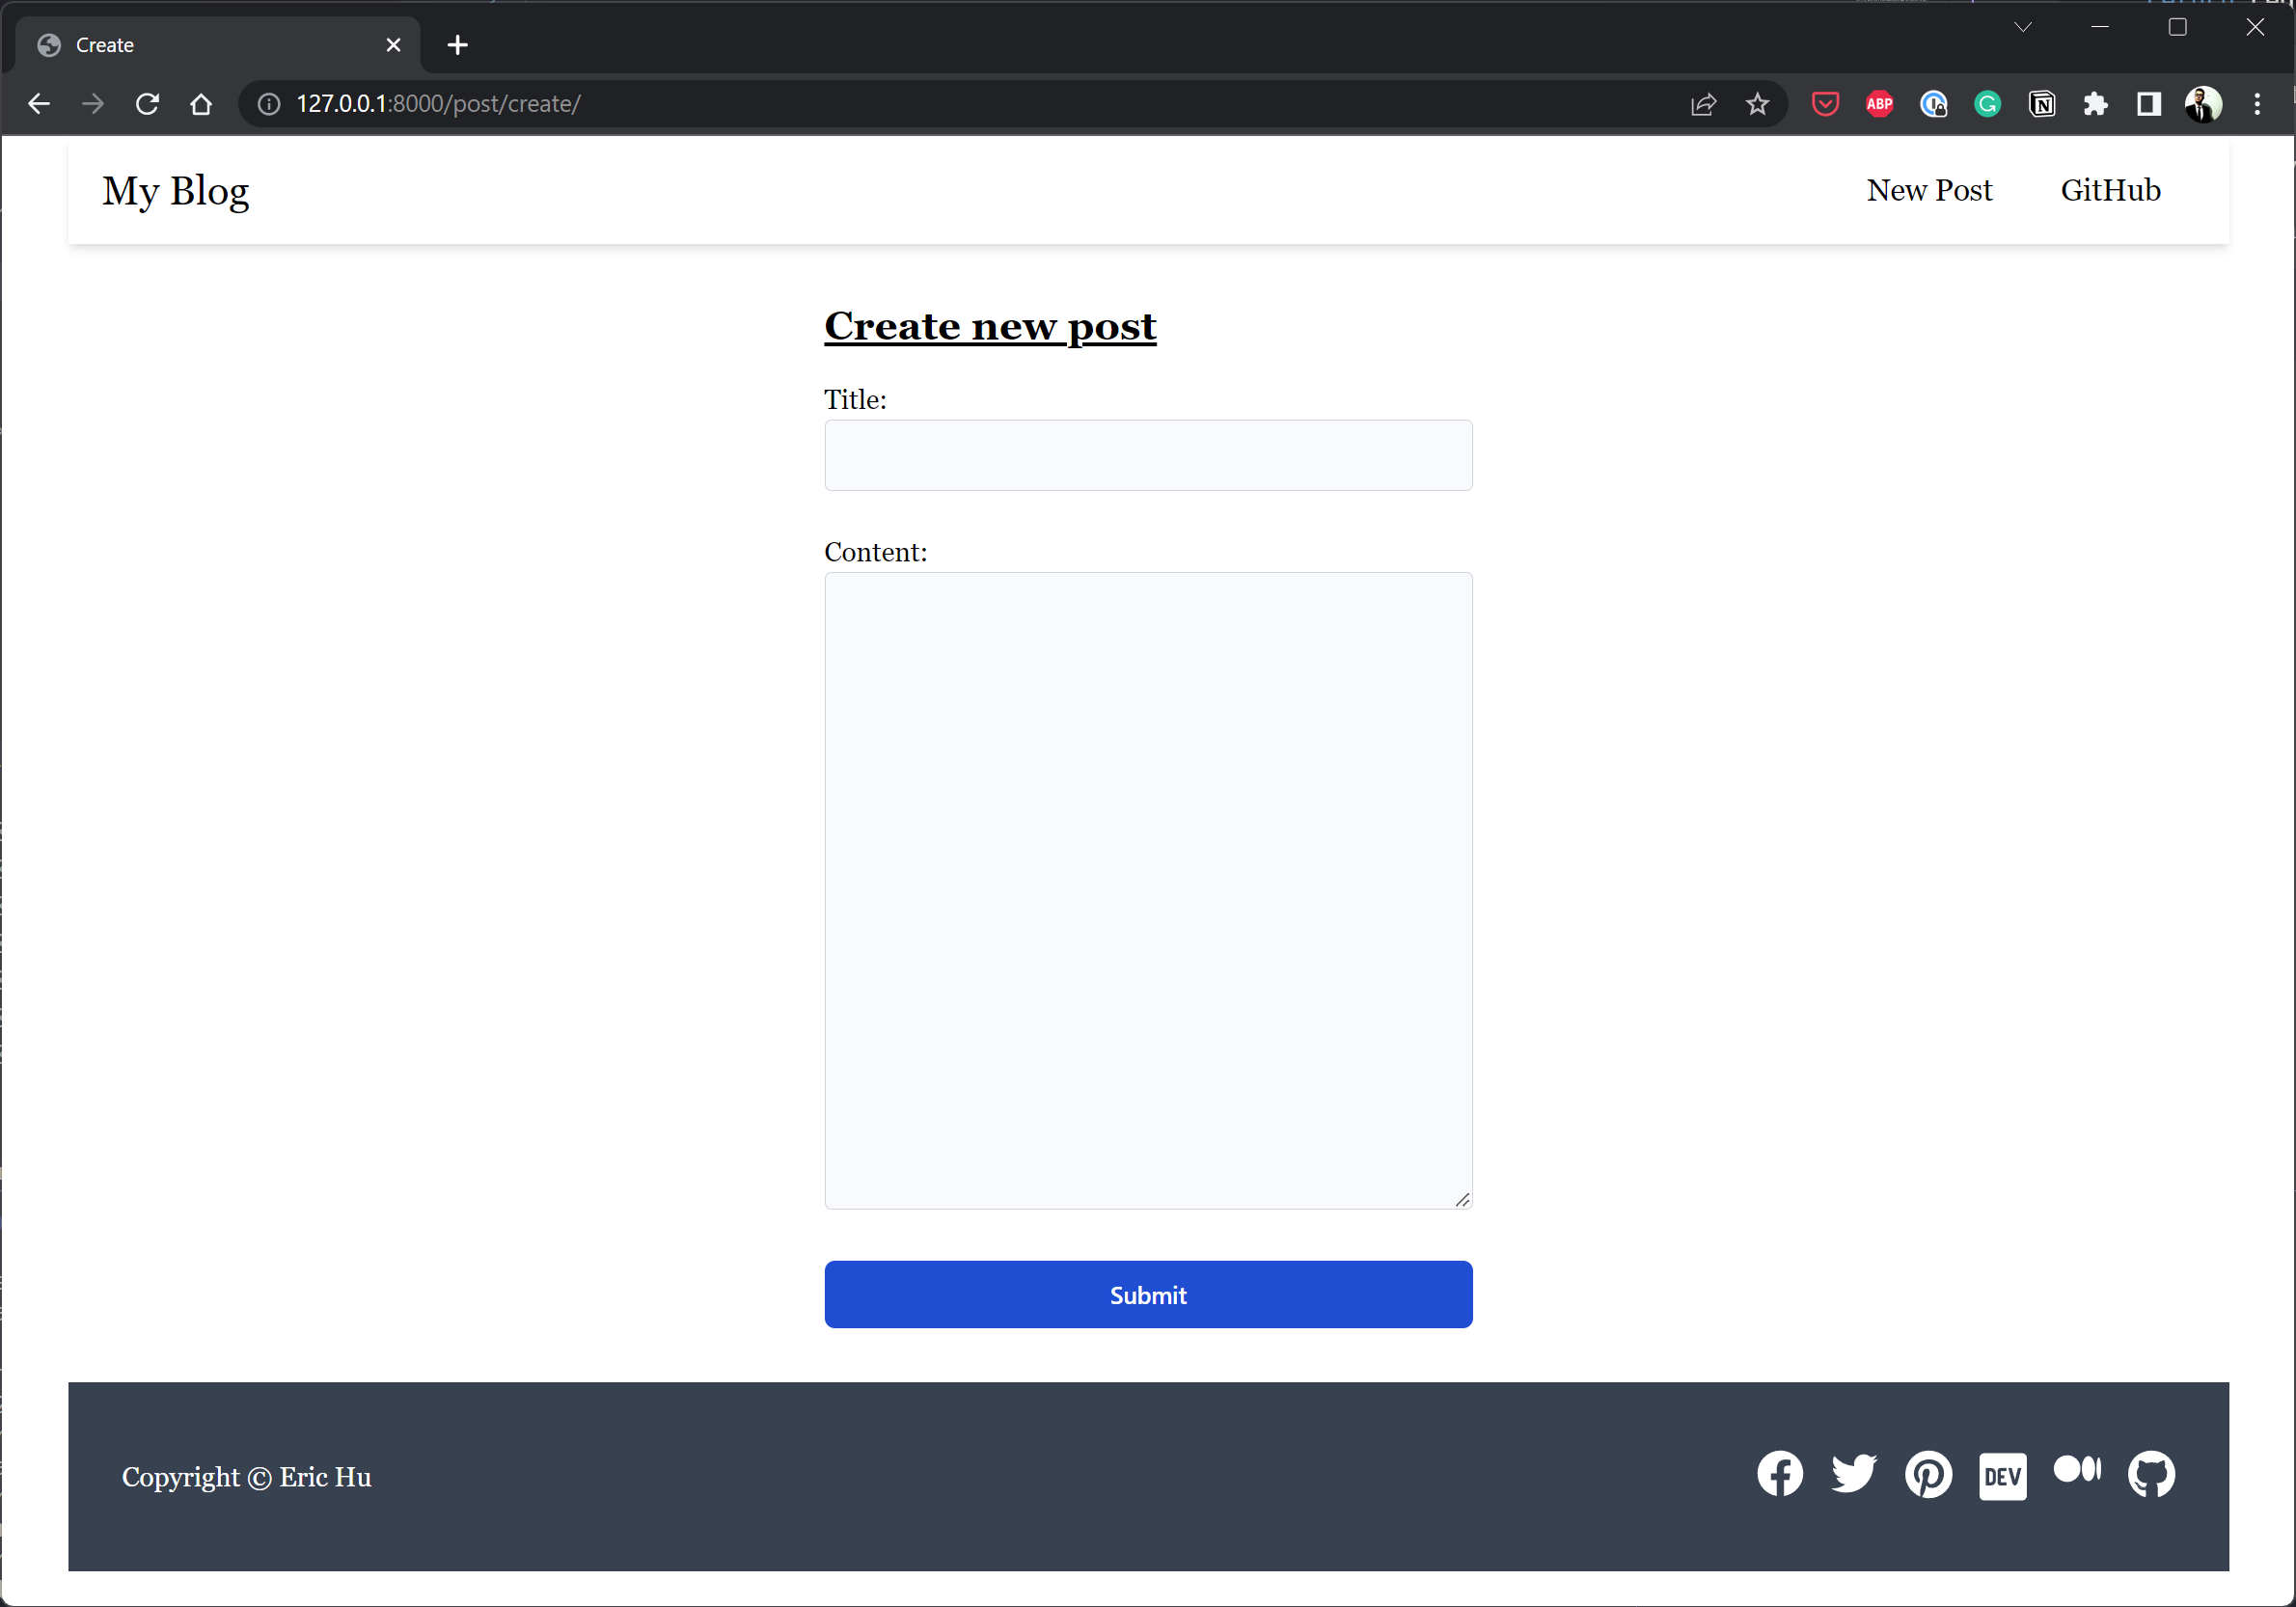 The create page